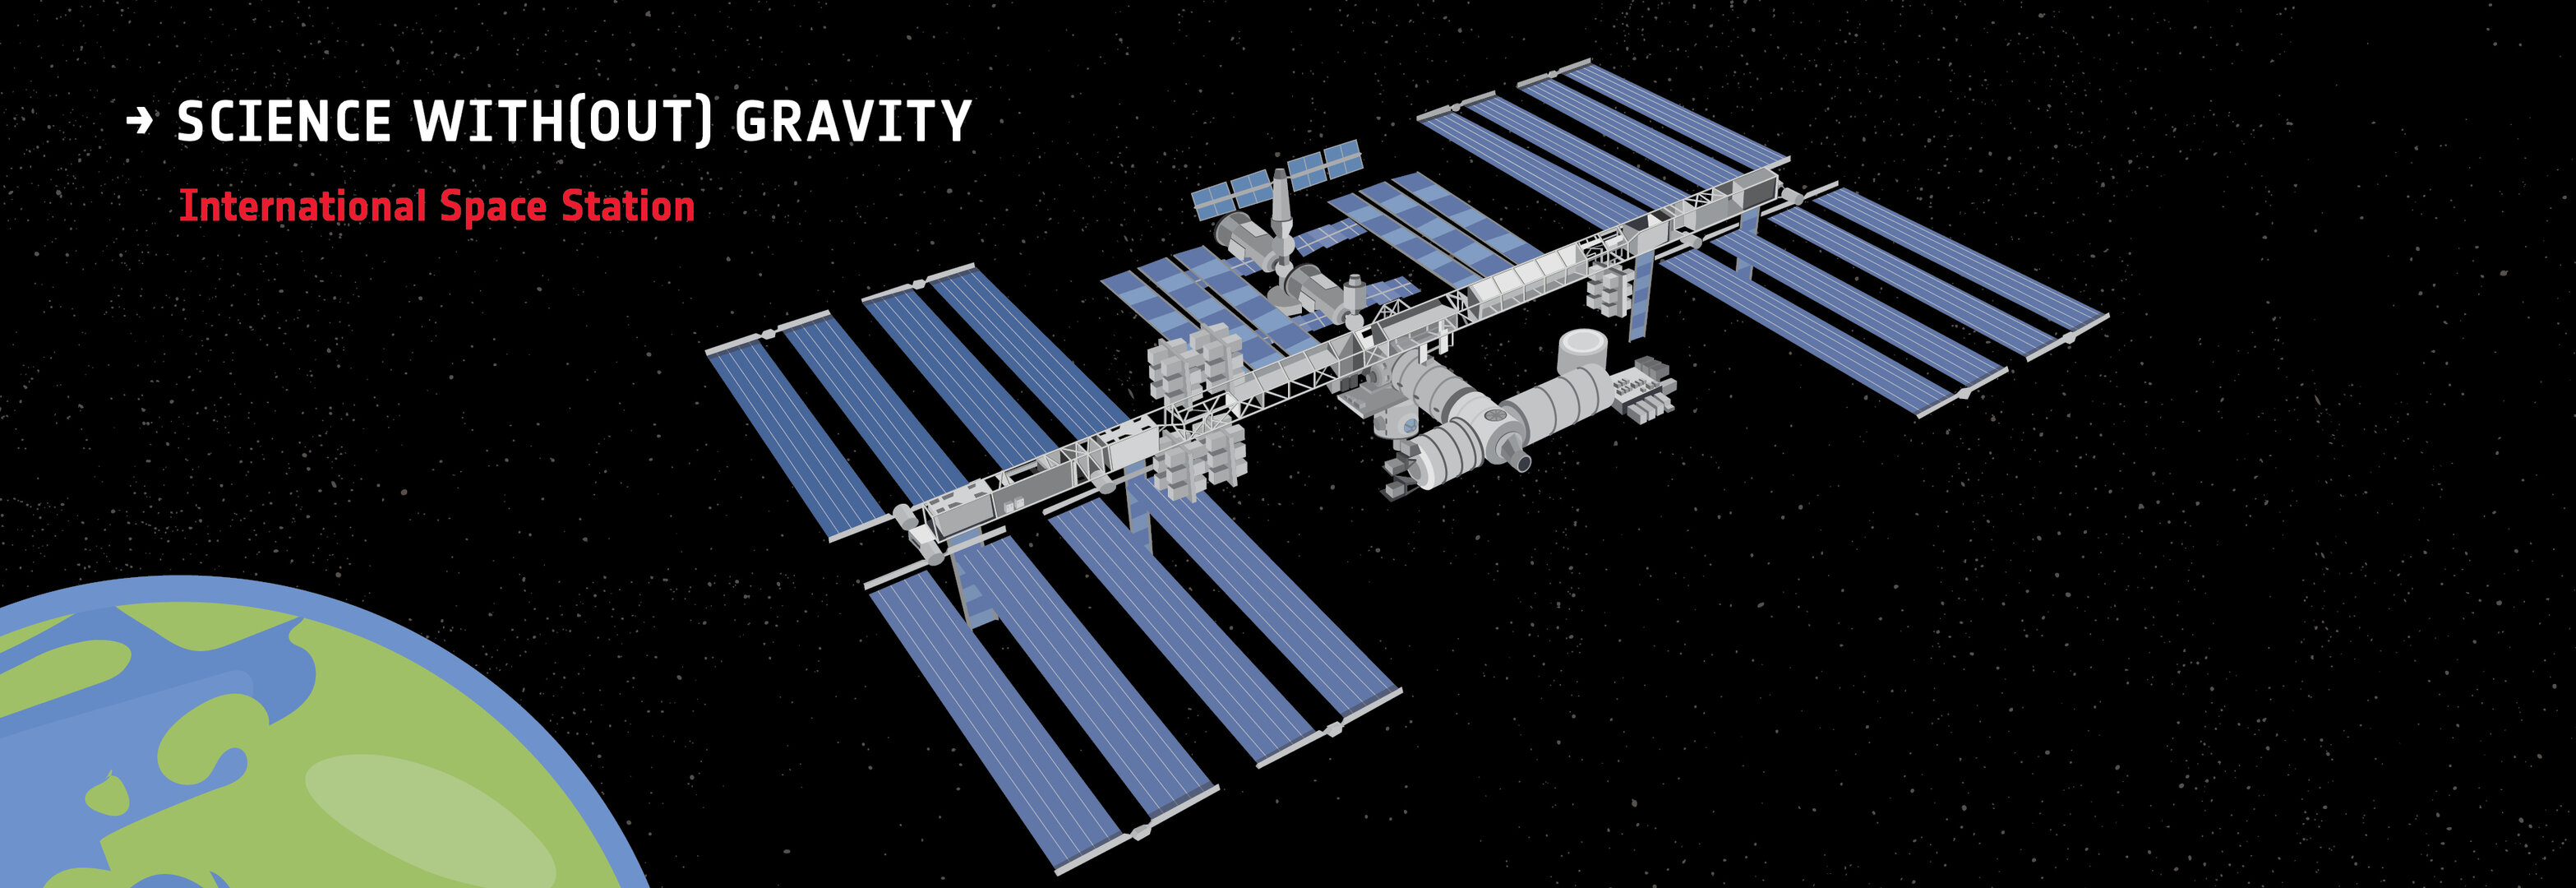 Science with(out) gravity  – International Space Station highlight version